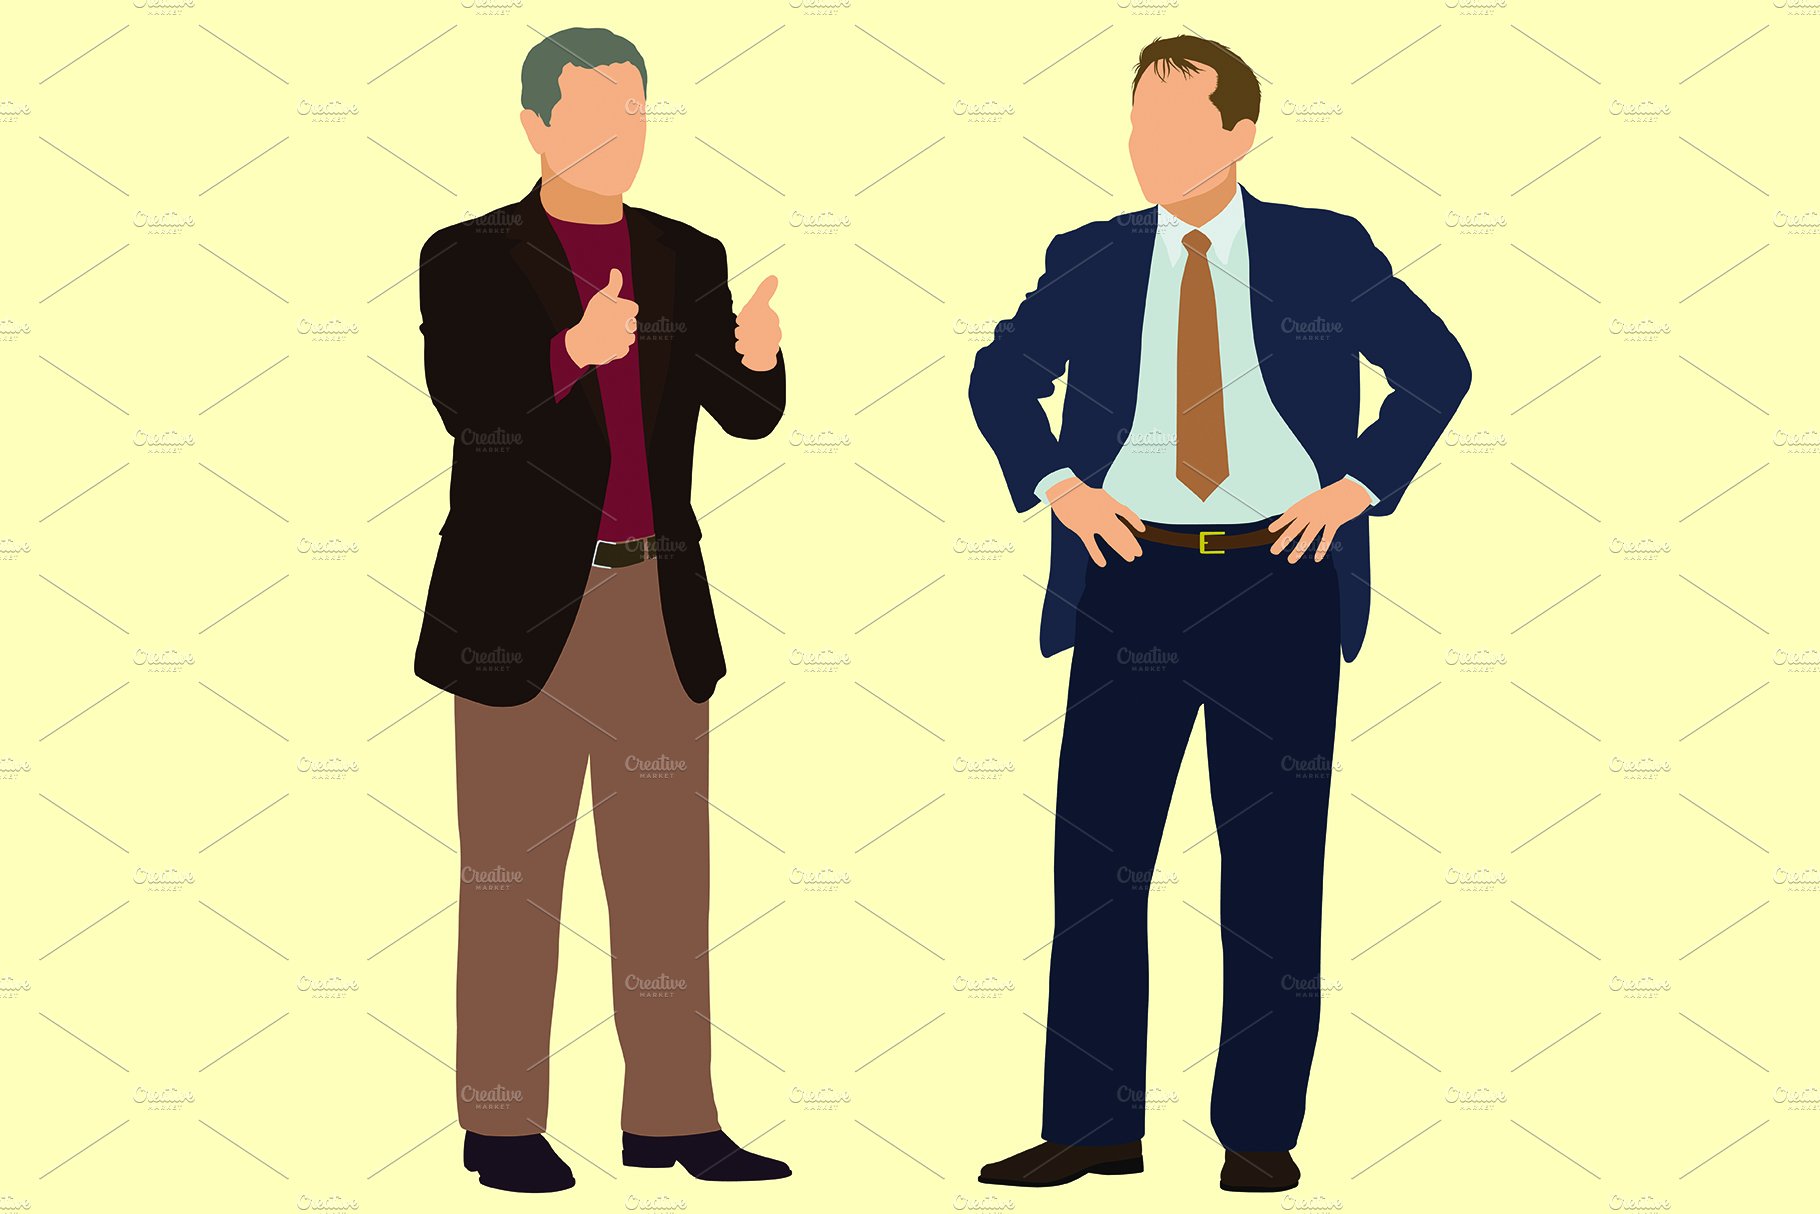 Middle-aged Men Gesturing cover image.